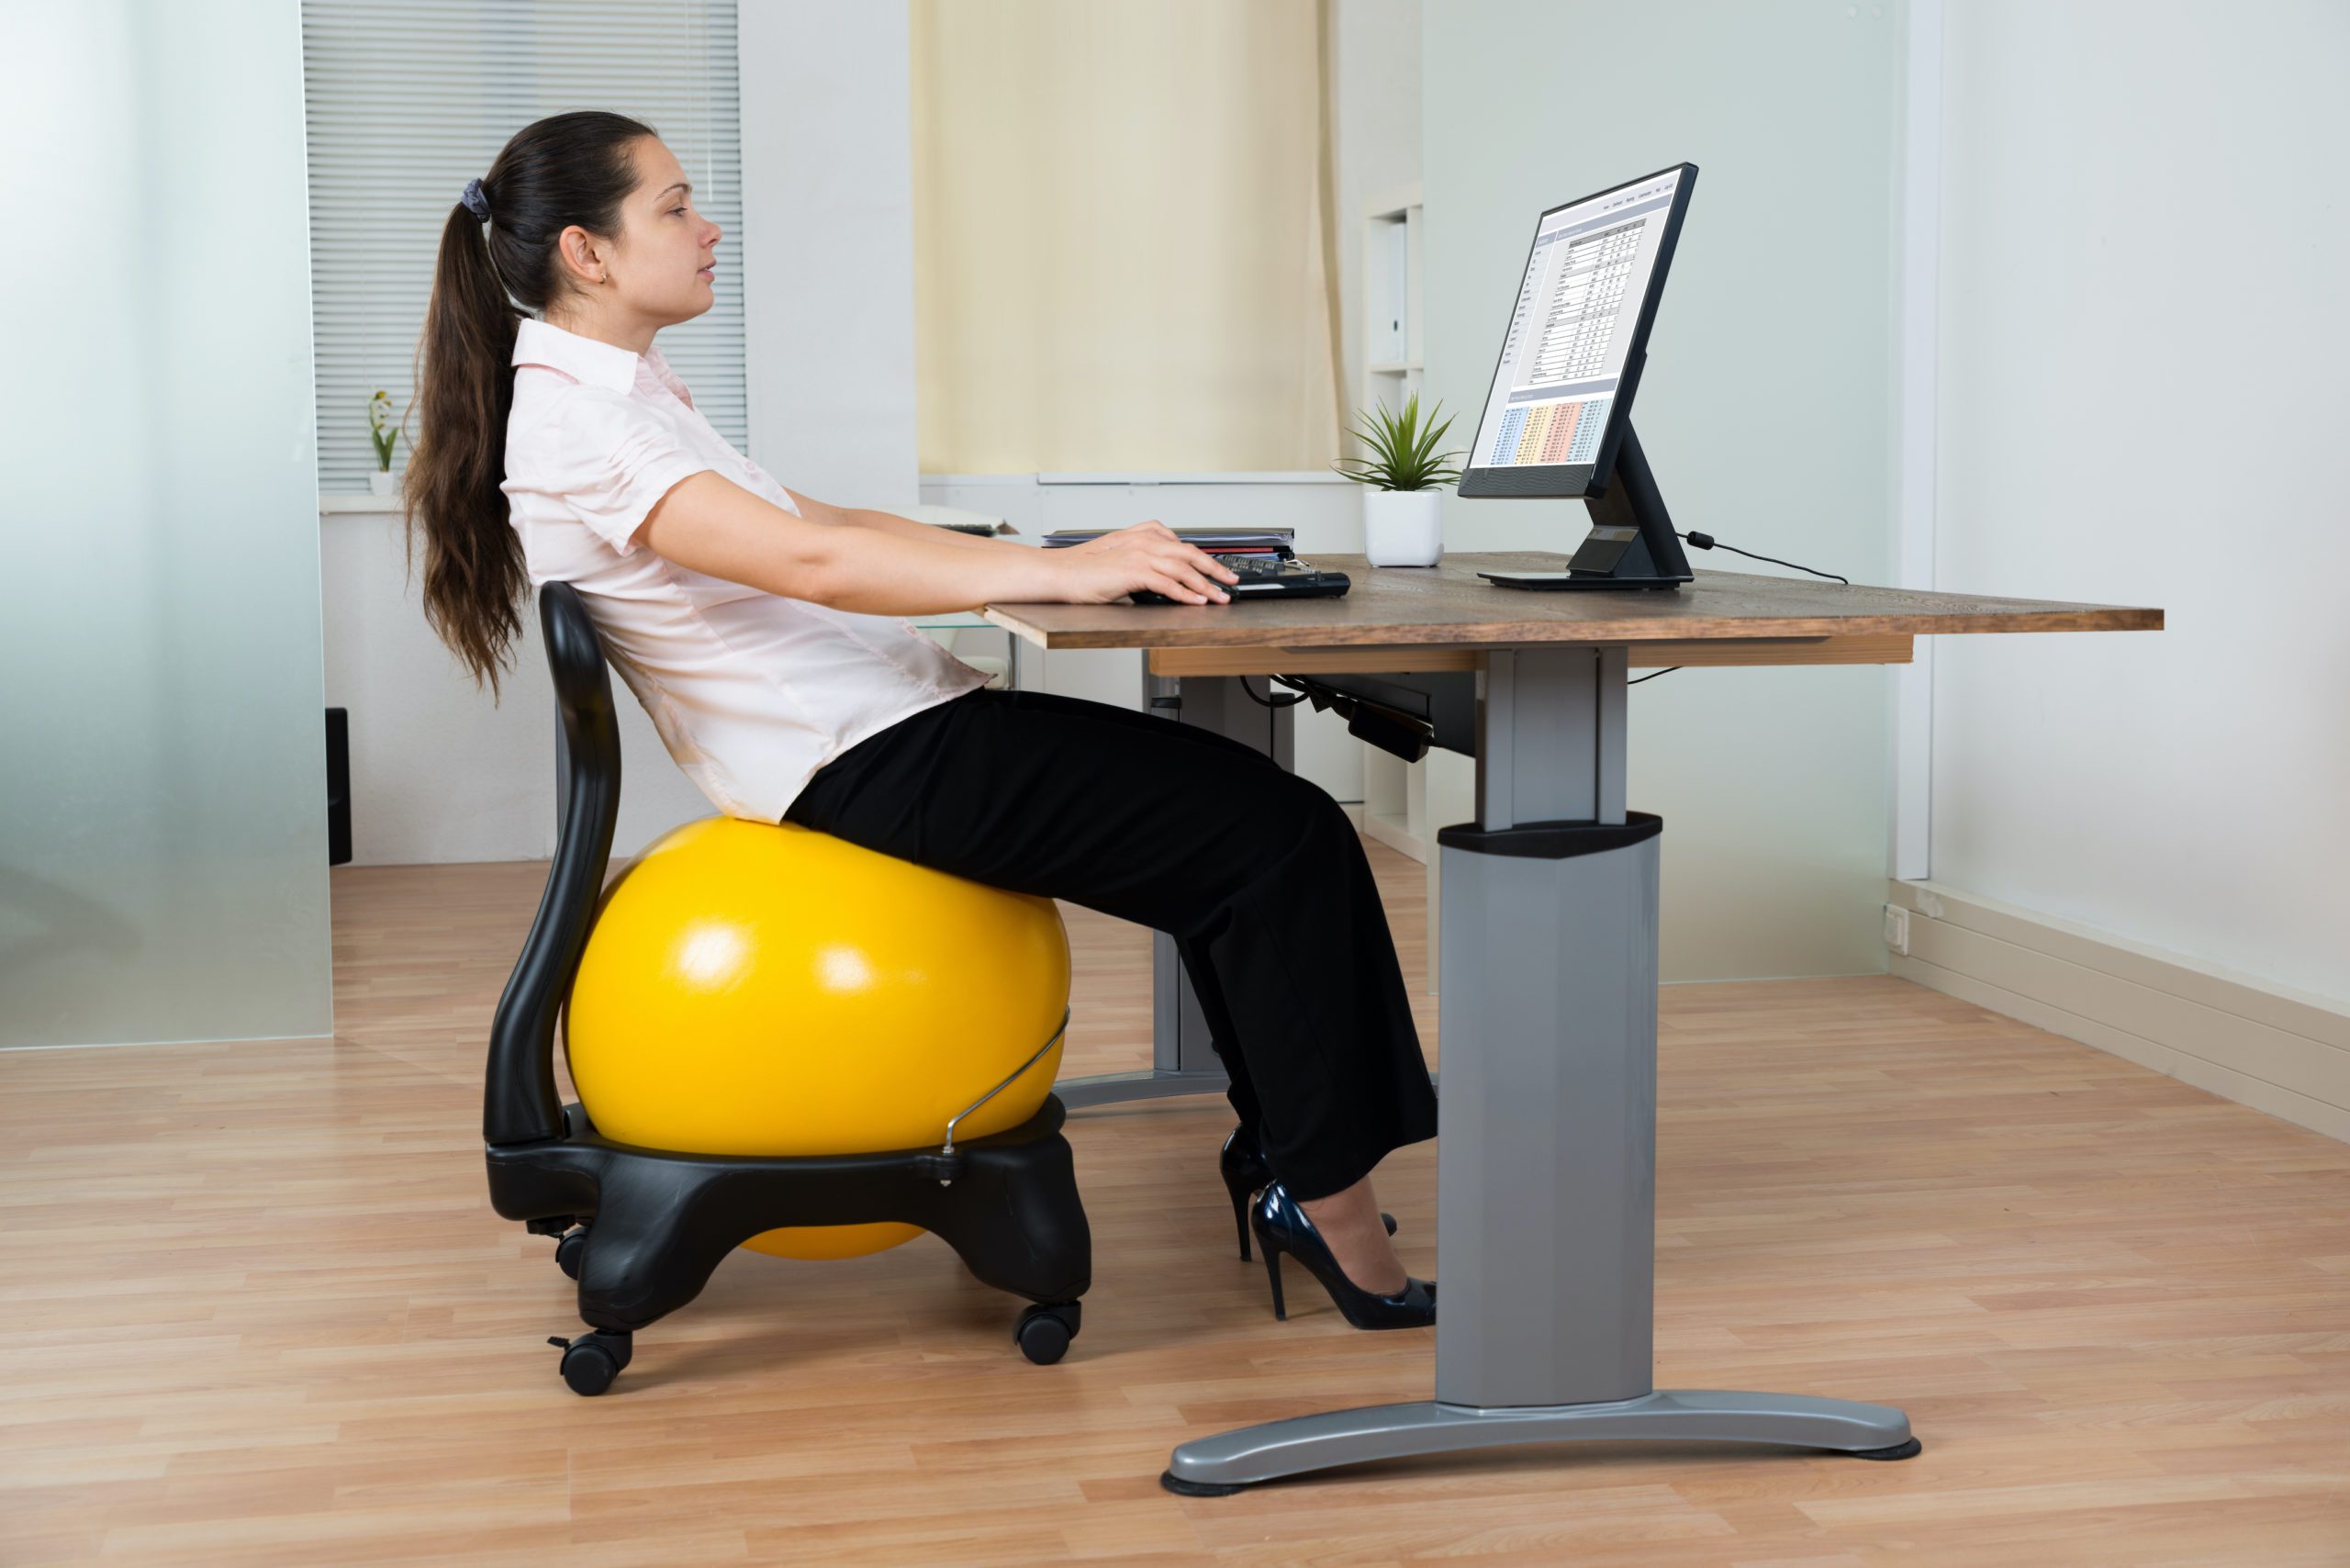 5 Benefits of Sitting on an Exercise Ball at Work